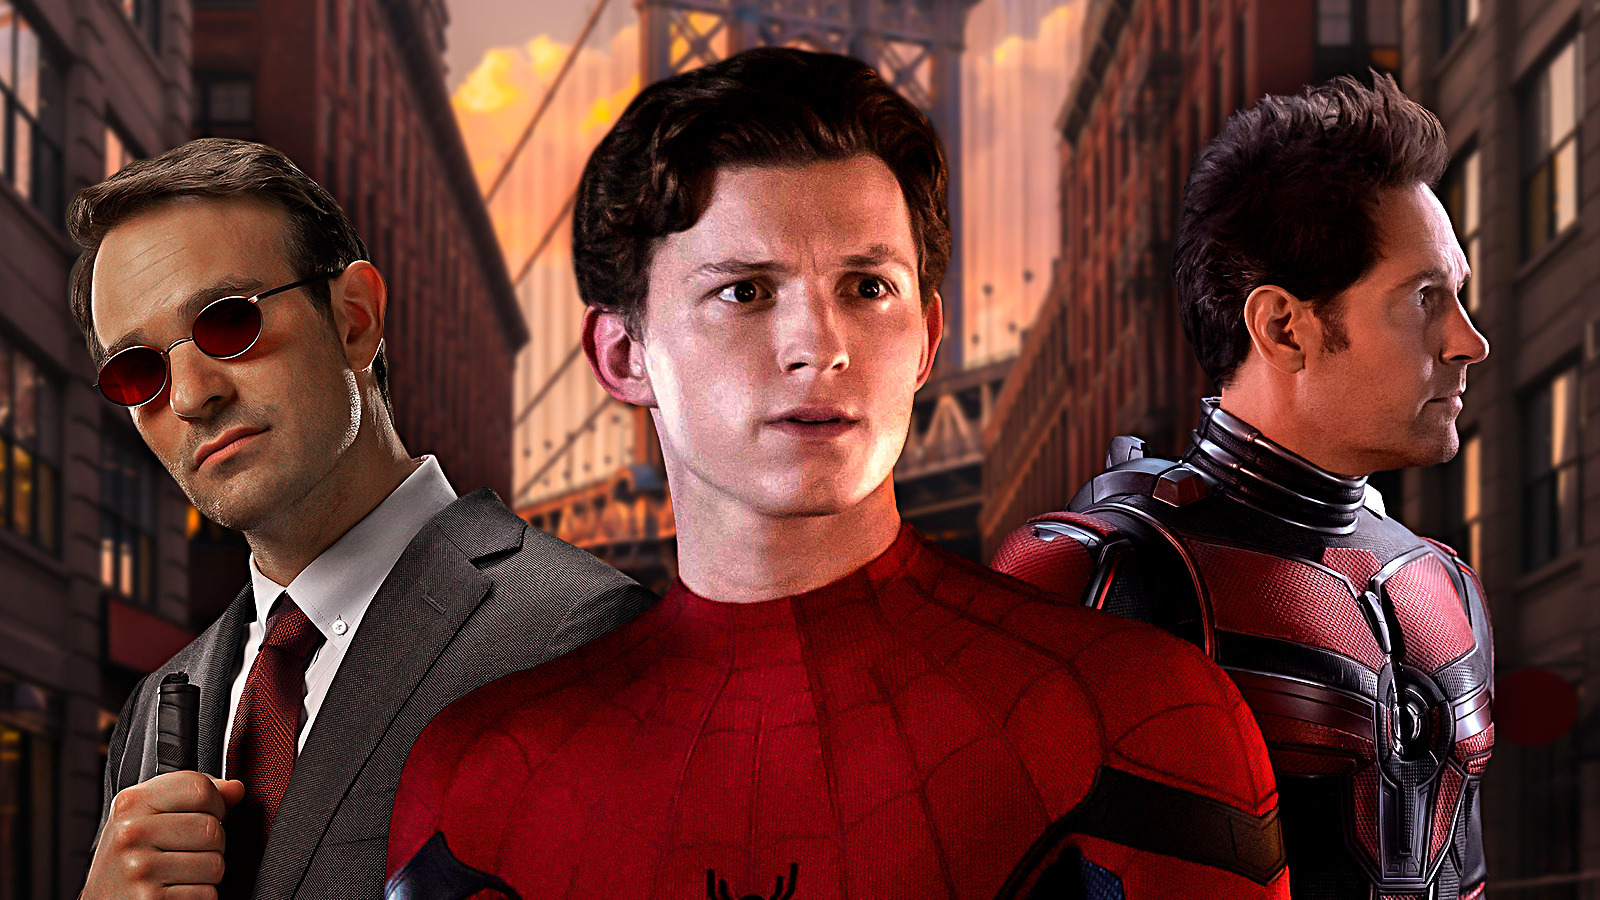 Spider-Man 4: What can fans expect in MCU Spider-Man 4?